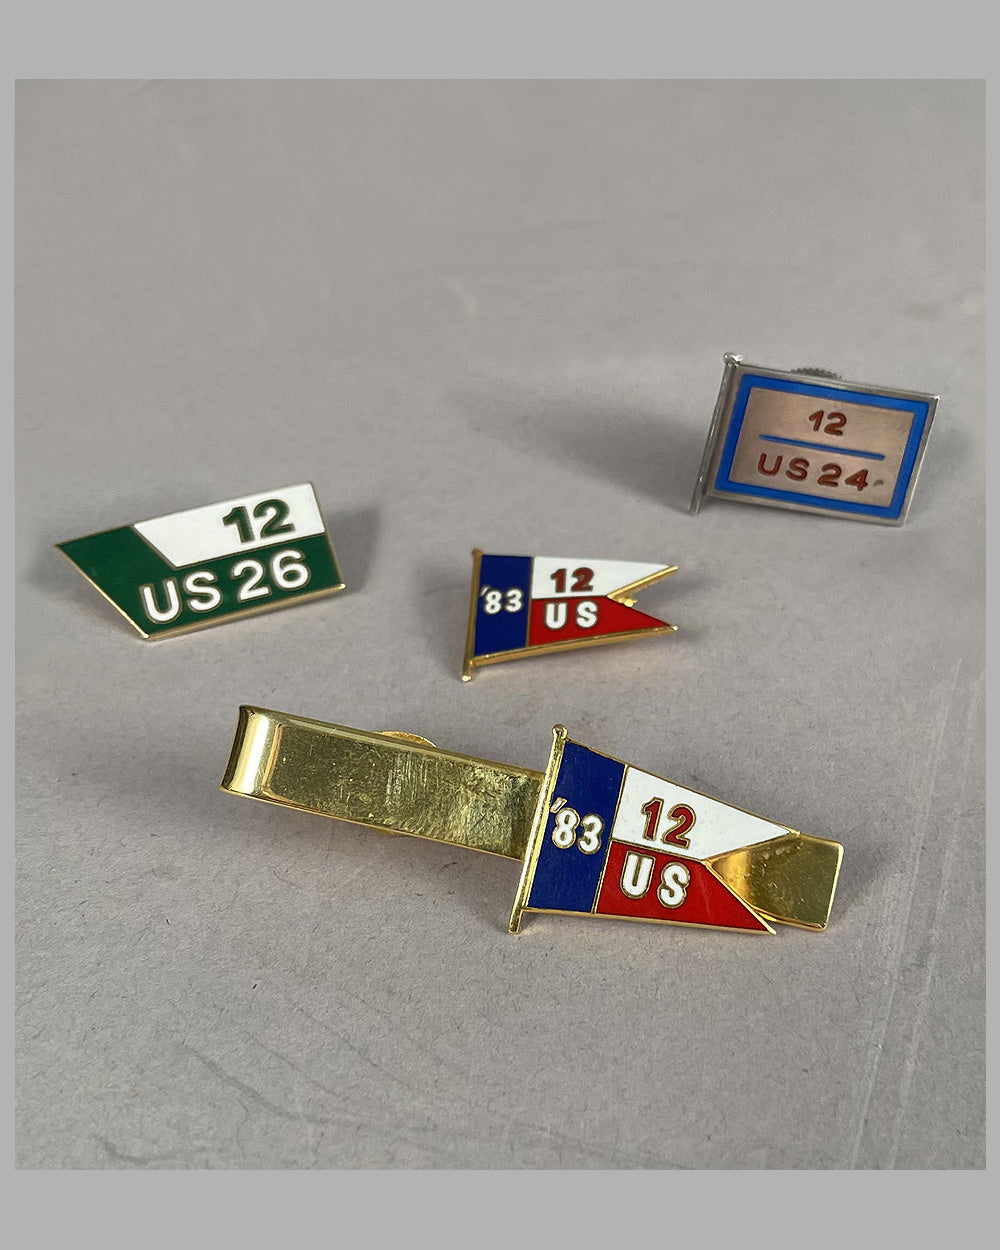 Three America's Cup lapel pins and one tie clip from the personal